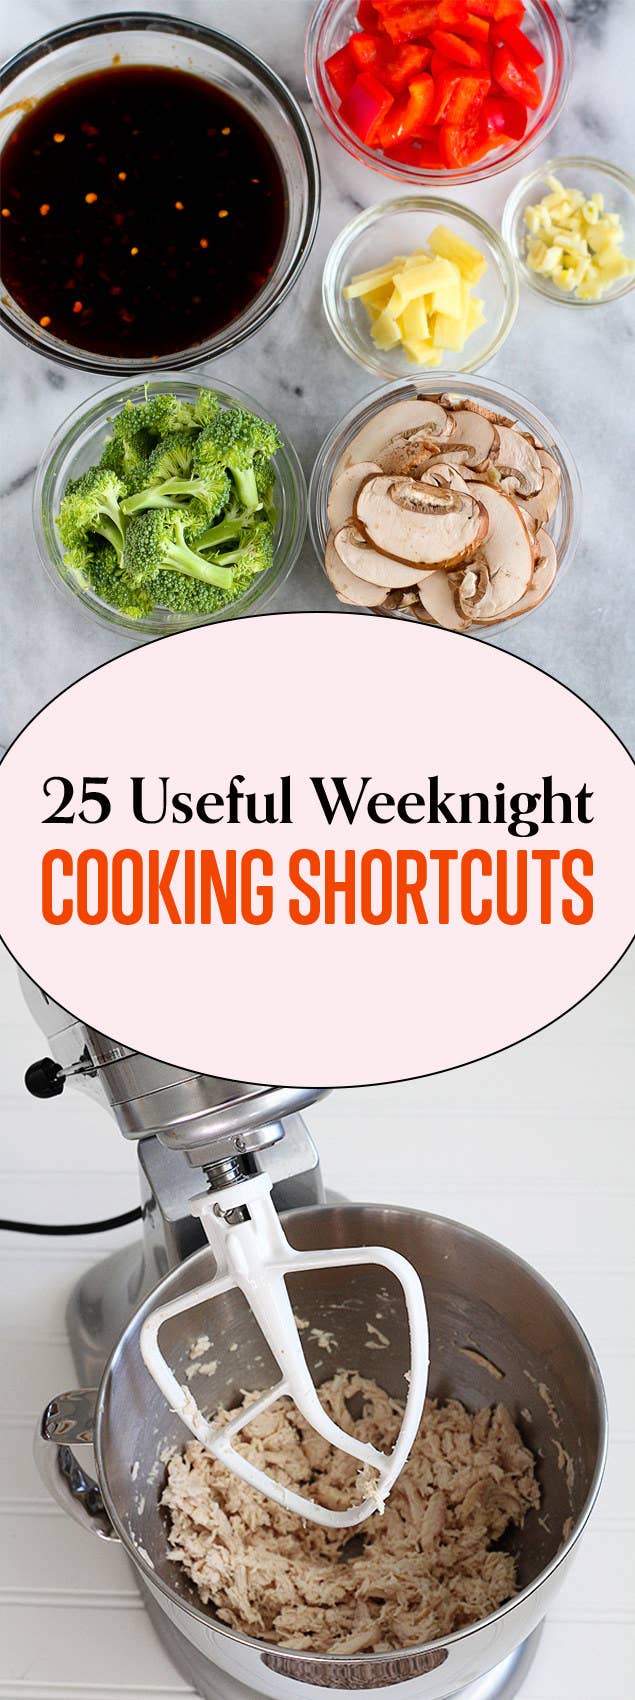 5 Dinner Shortcuts for When You Need a Break in the Kitchen